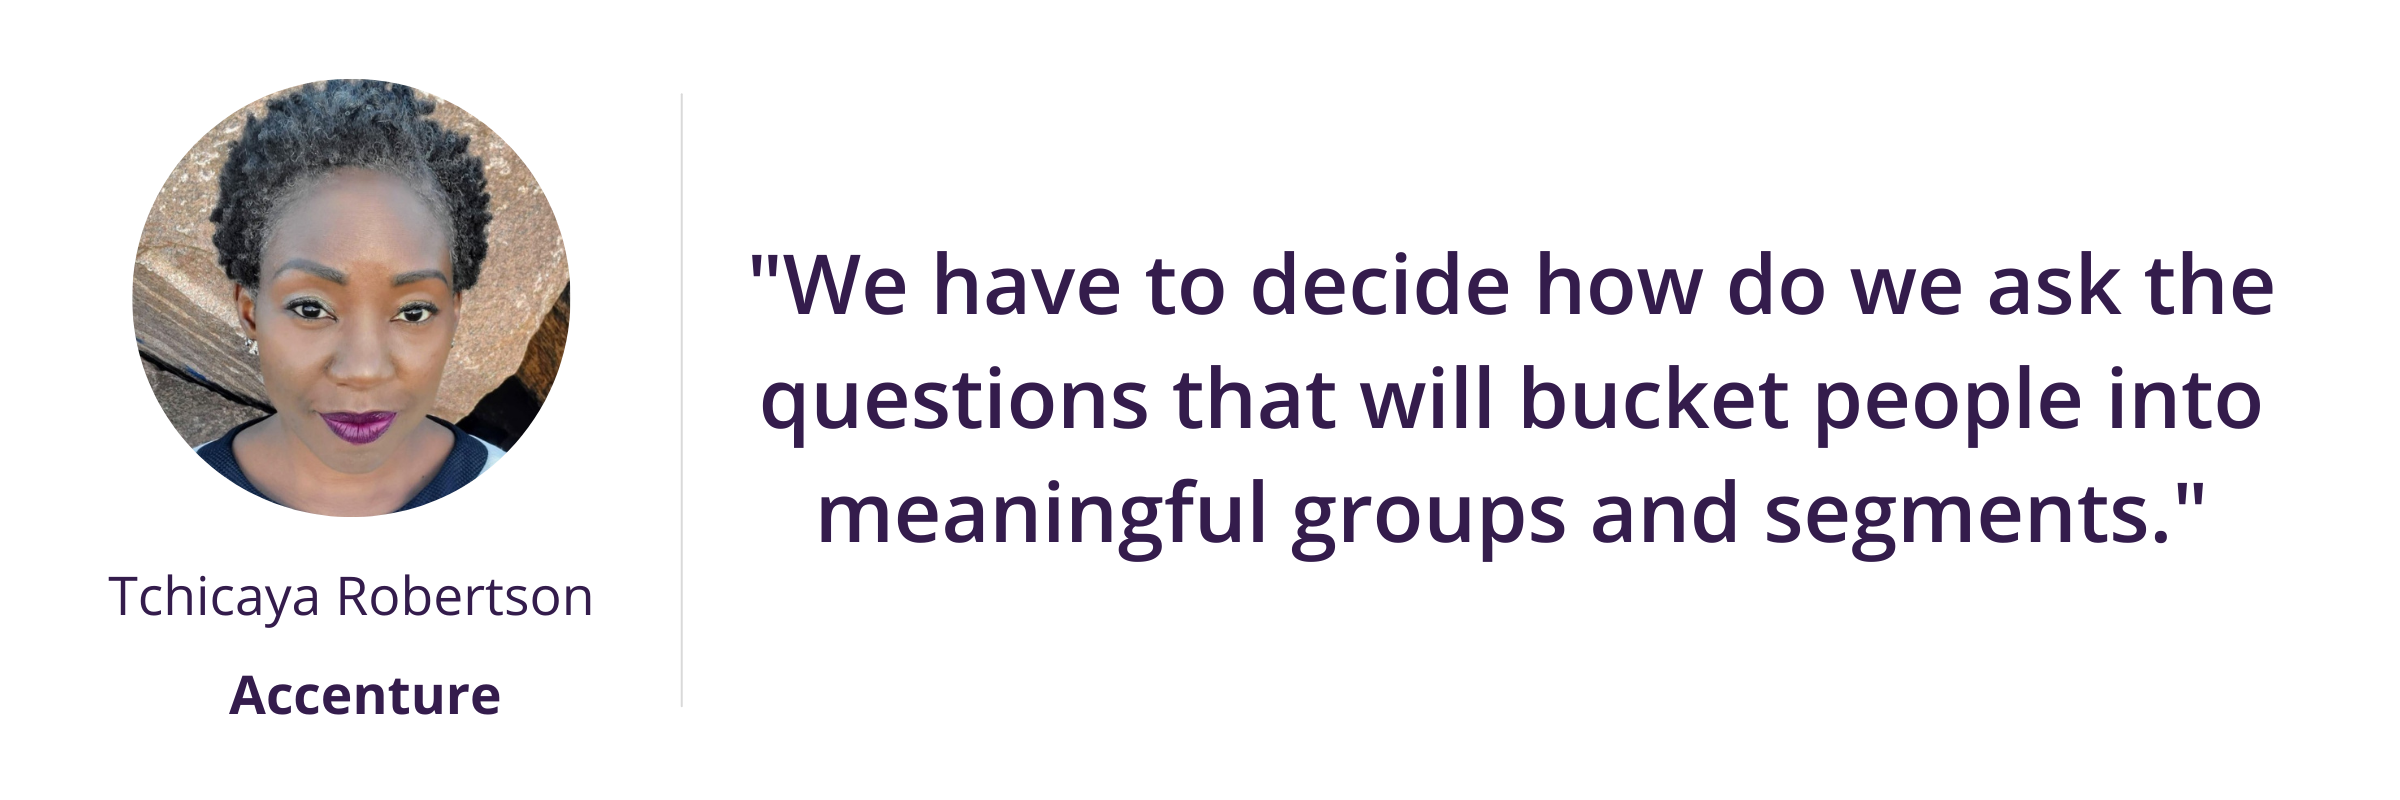 "We have to decide how do we ask the questions that will bucket people into meaningful groups and segments."